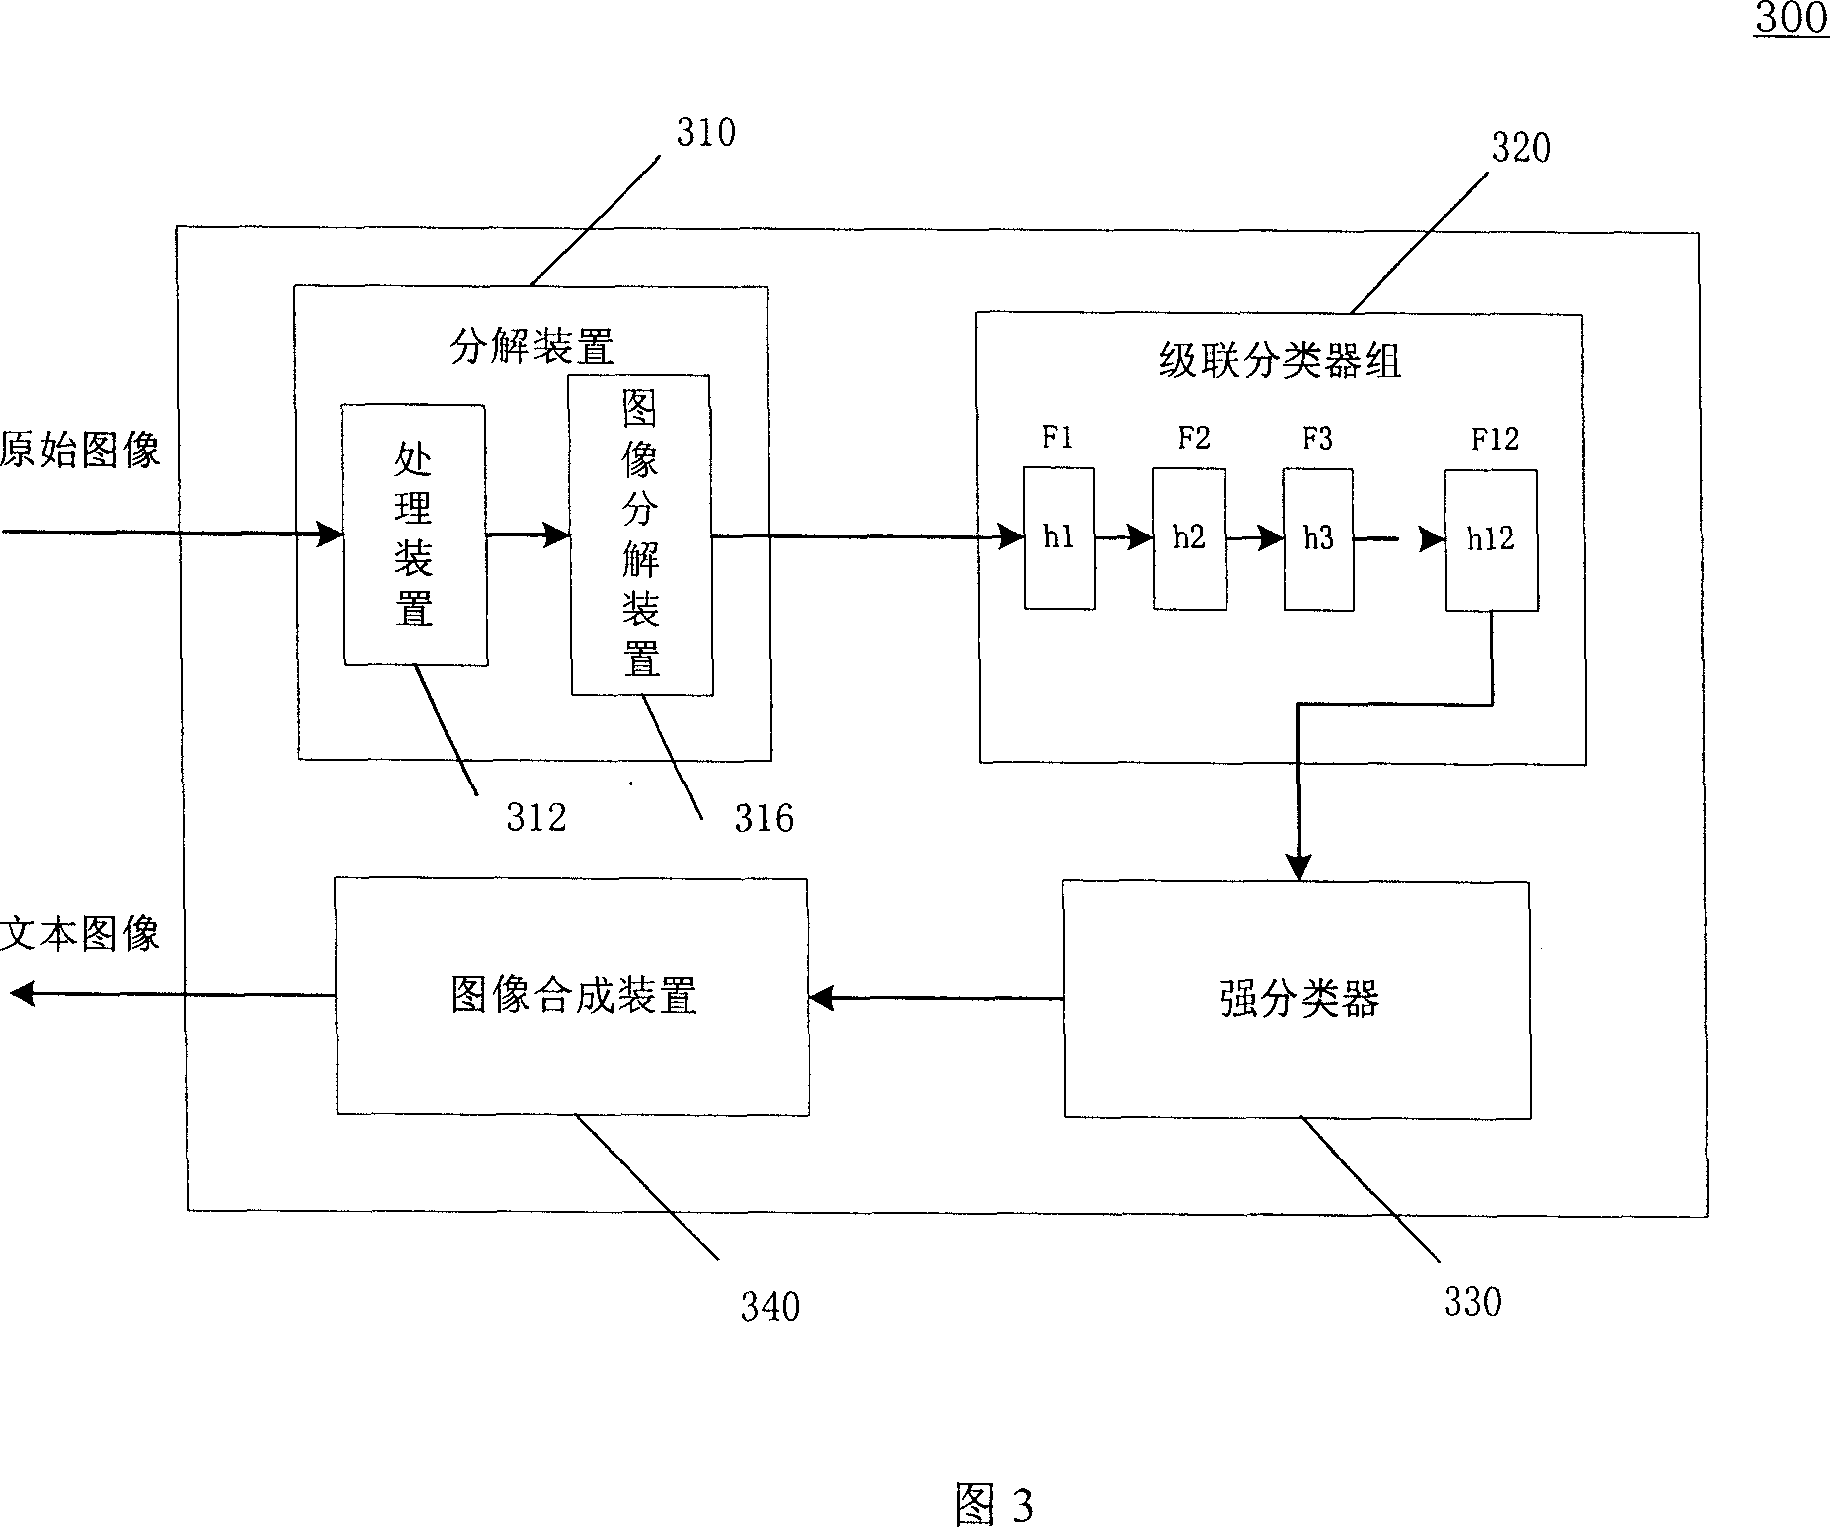 Method for determining connection sequence of cascade classifiers with different features and specific threshold